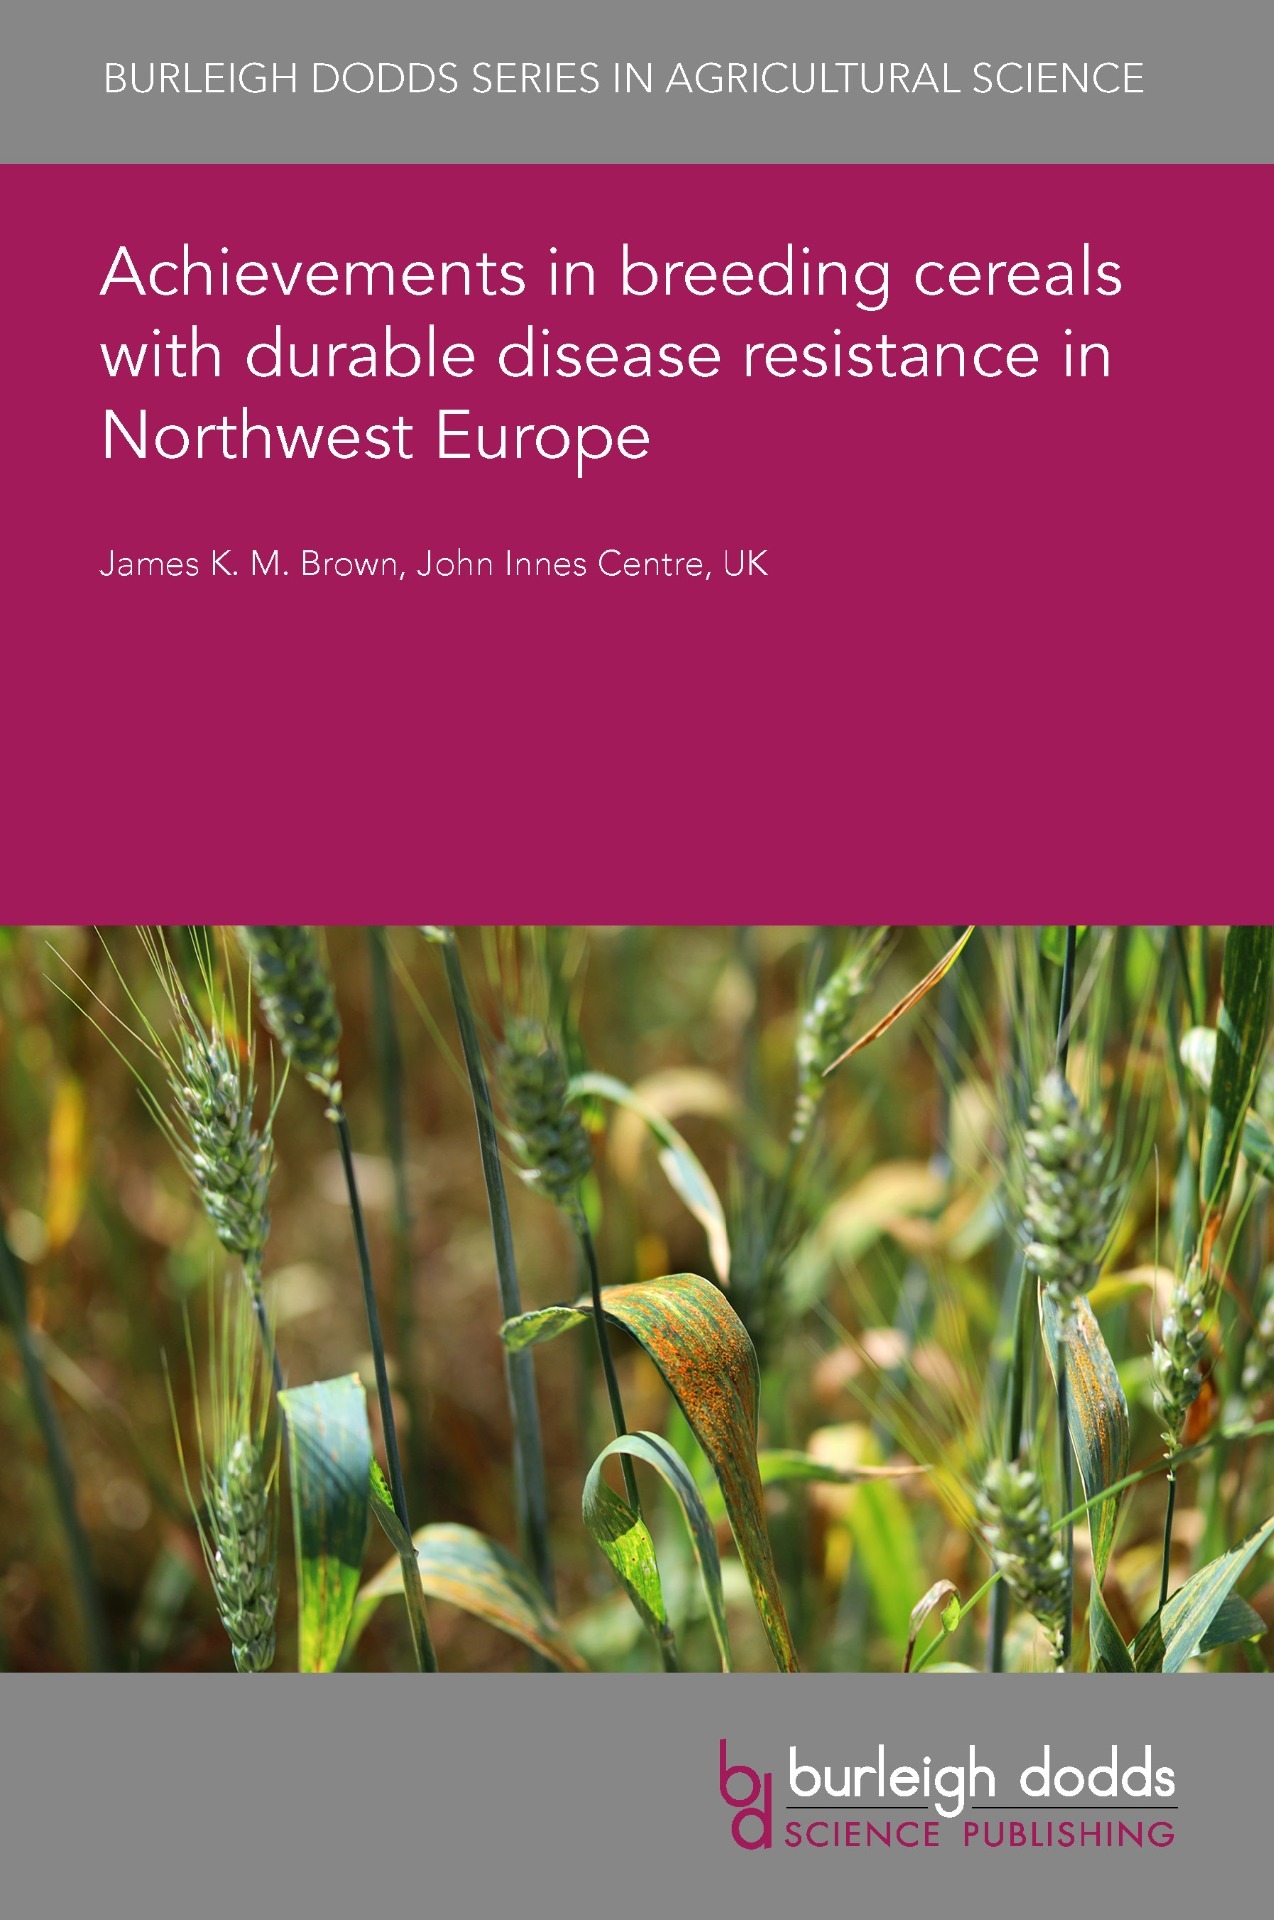 Achievements in breeding cereals with durable disease resistance in Northwest Europe